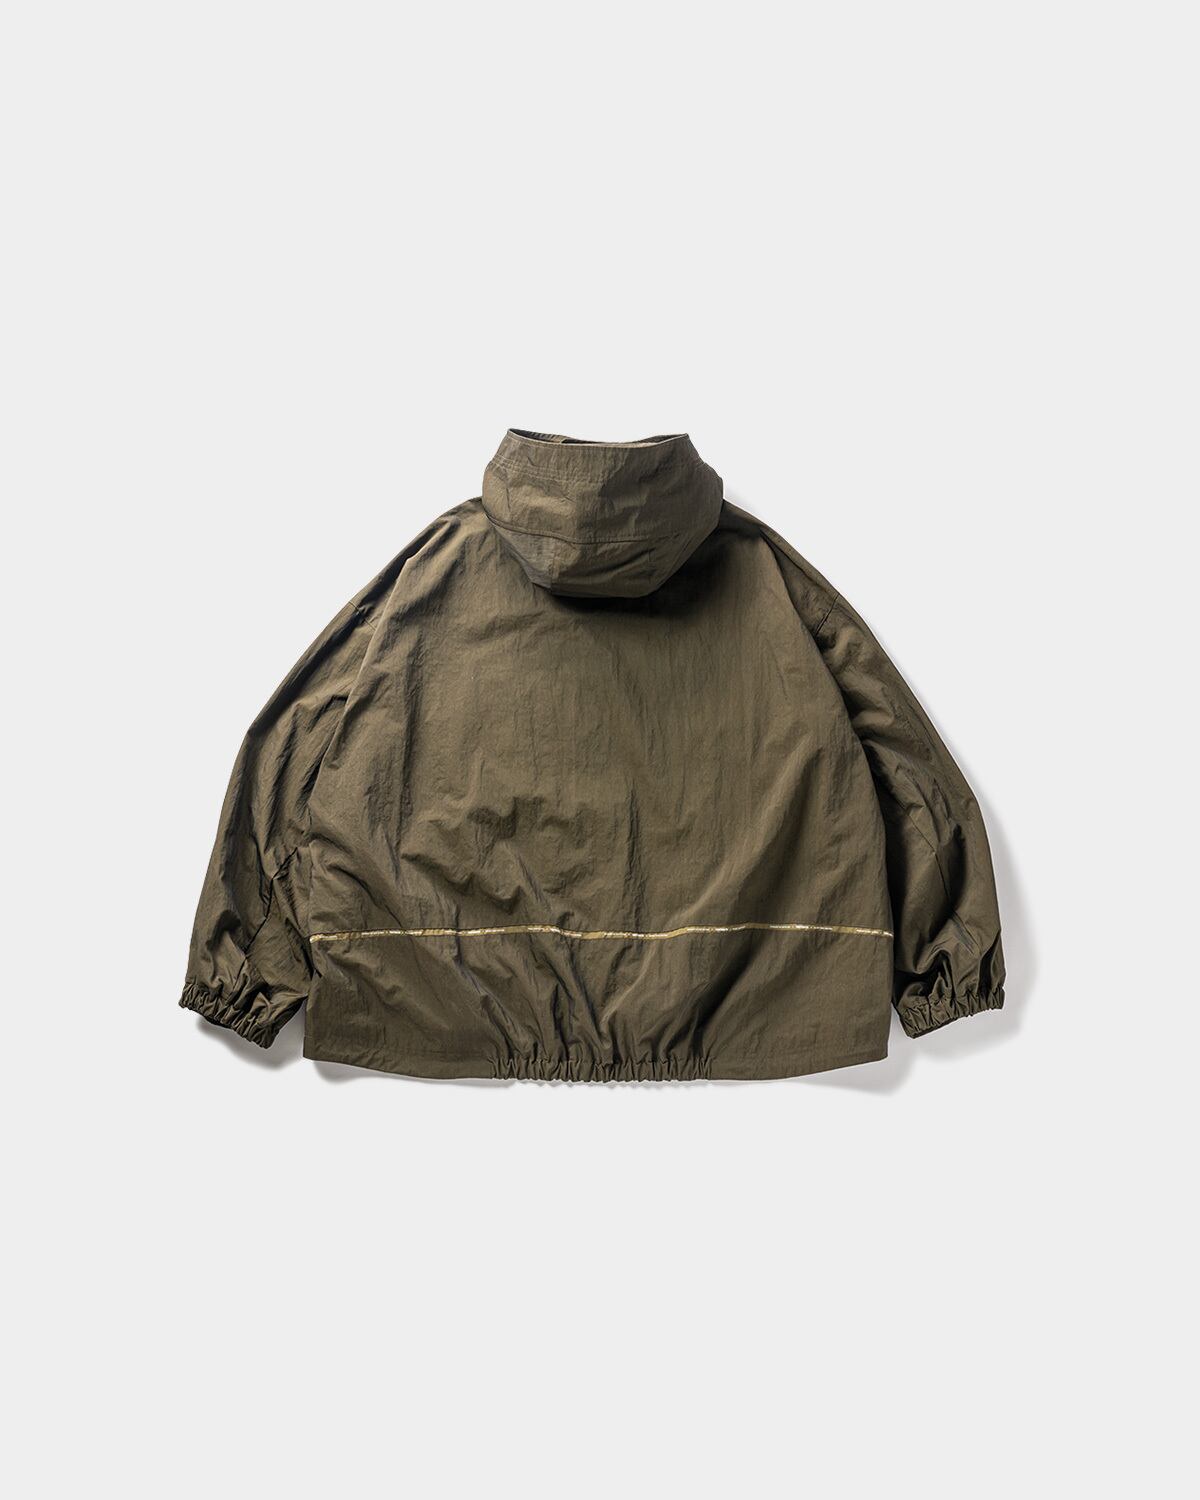 TIGHTBOOTH HUNTING JKT OLIVE